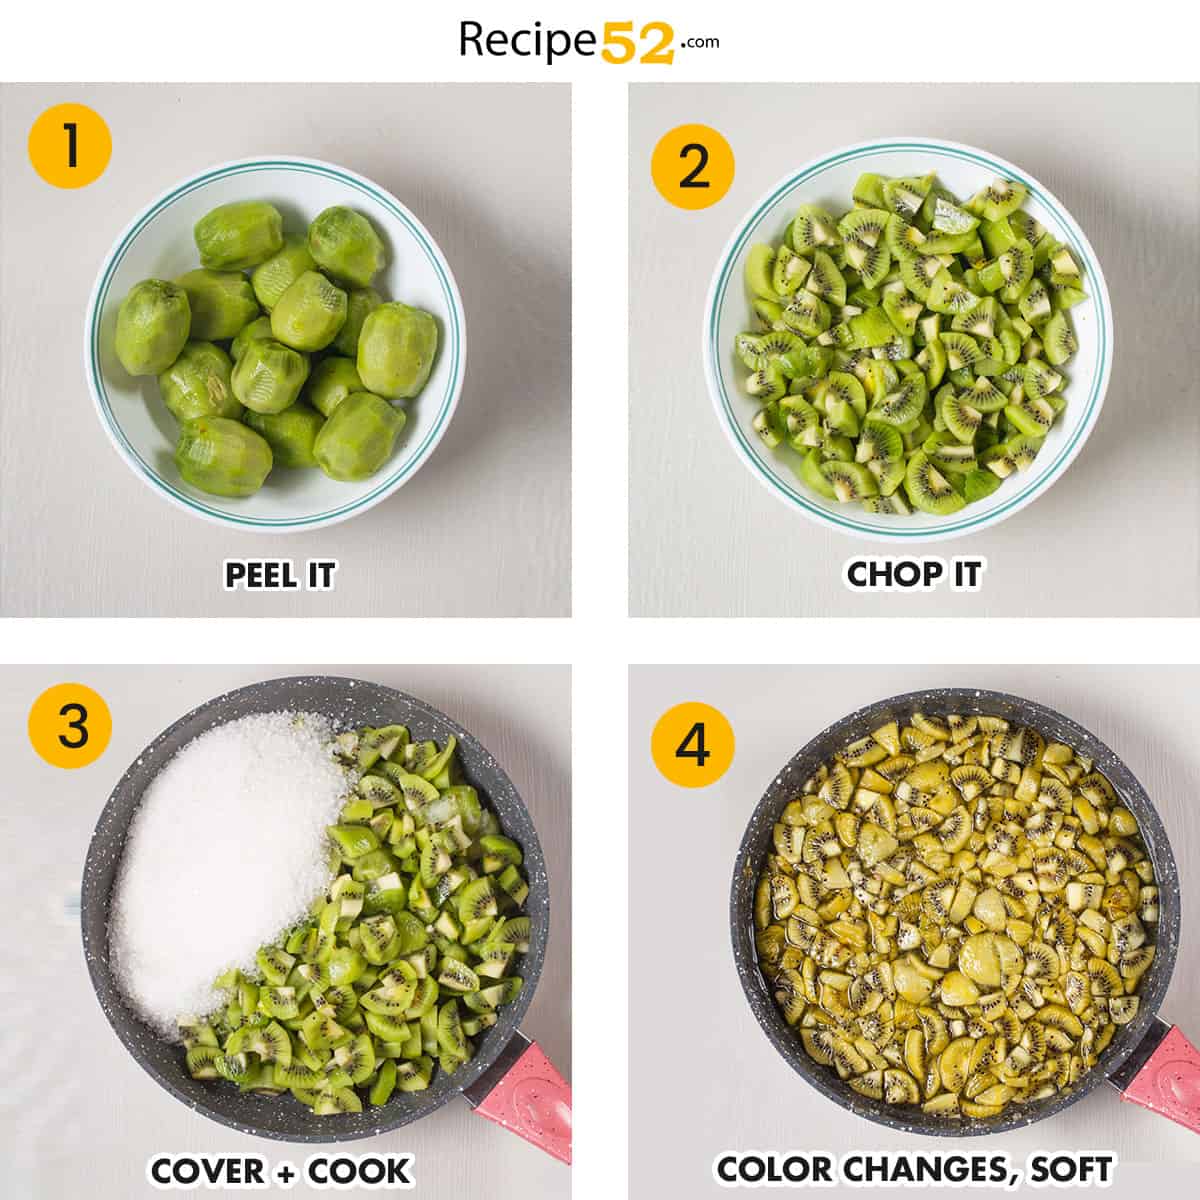 Steps to prepare and cook kiwi.